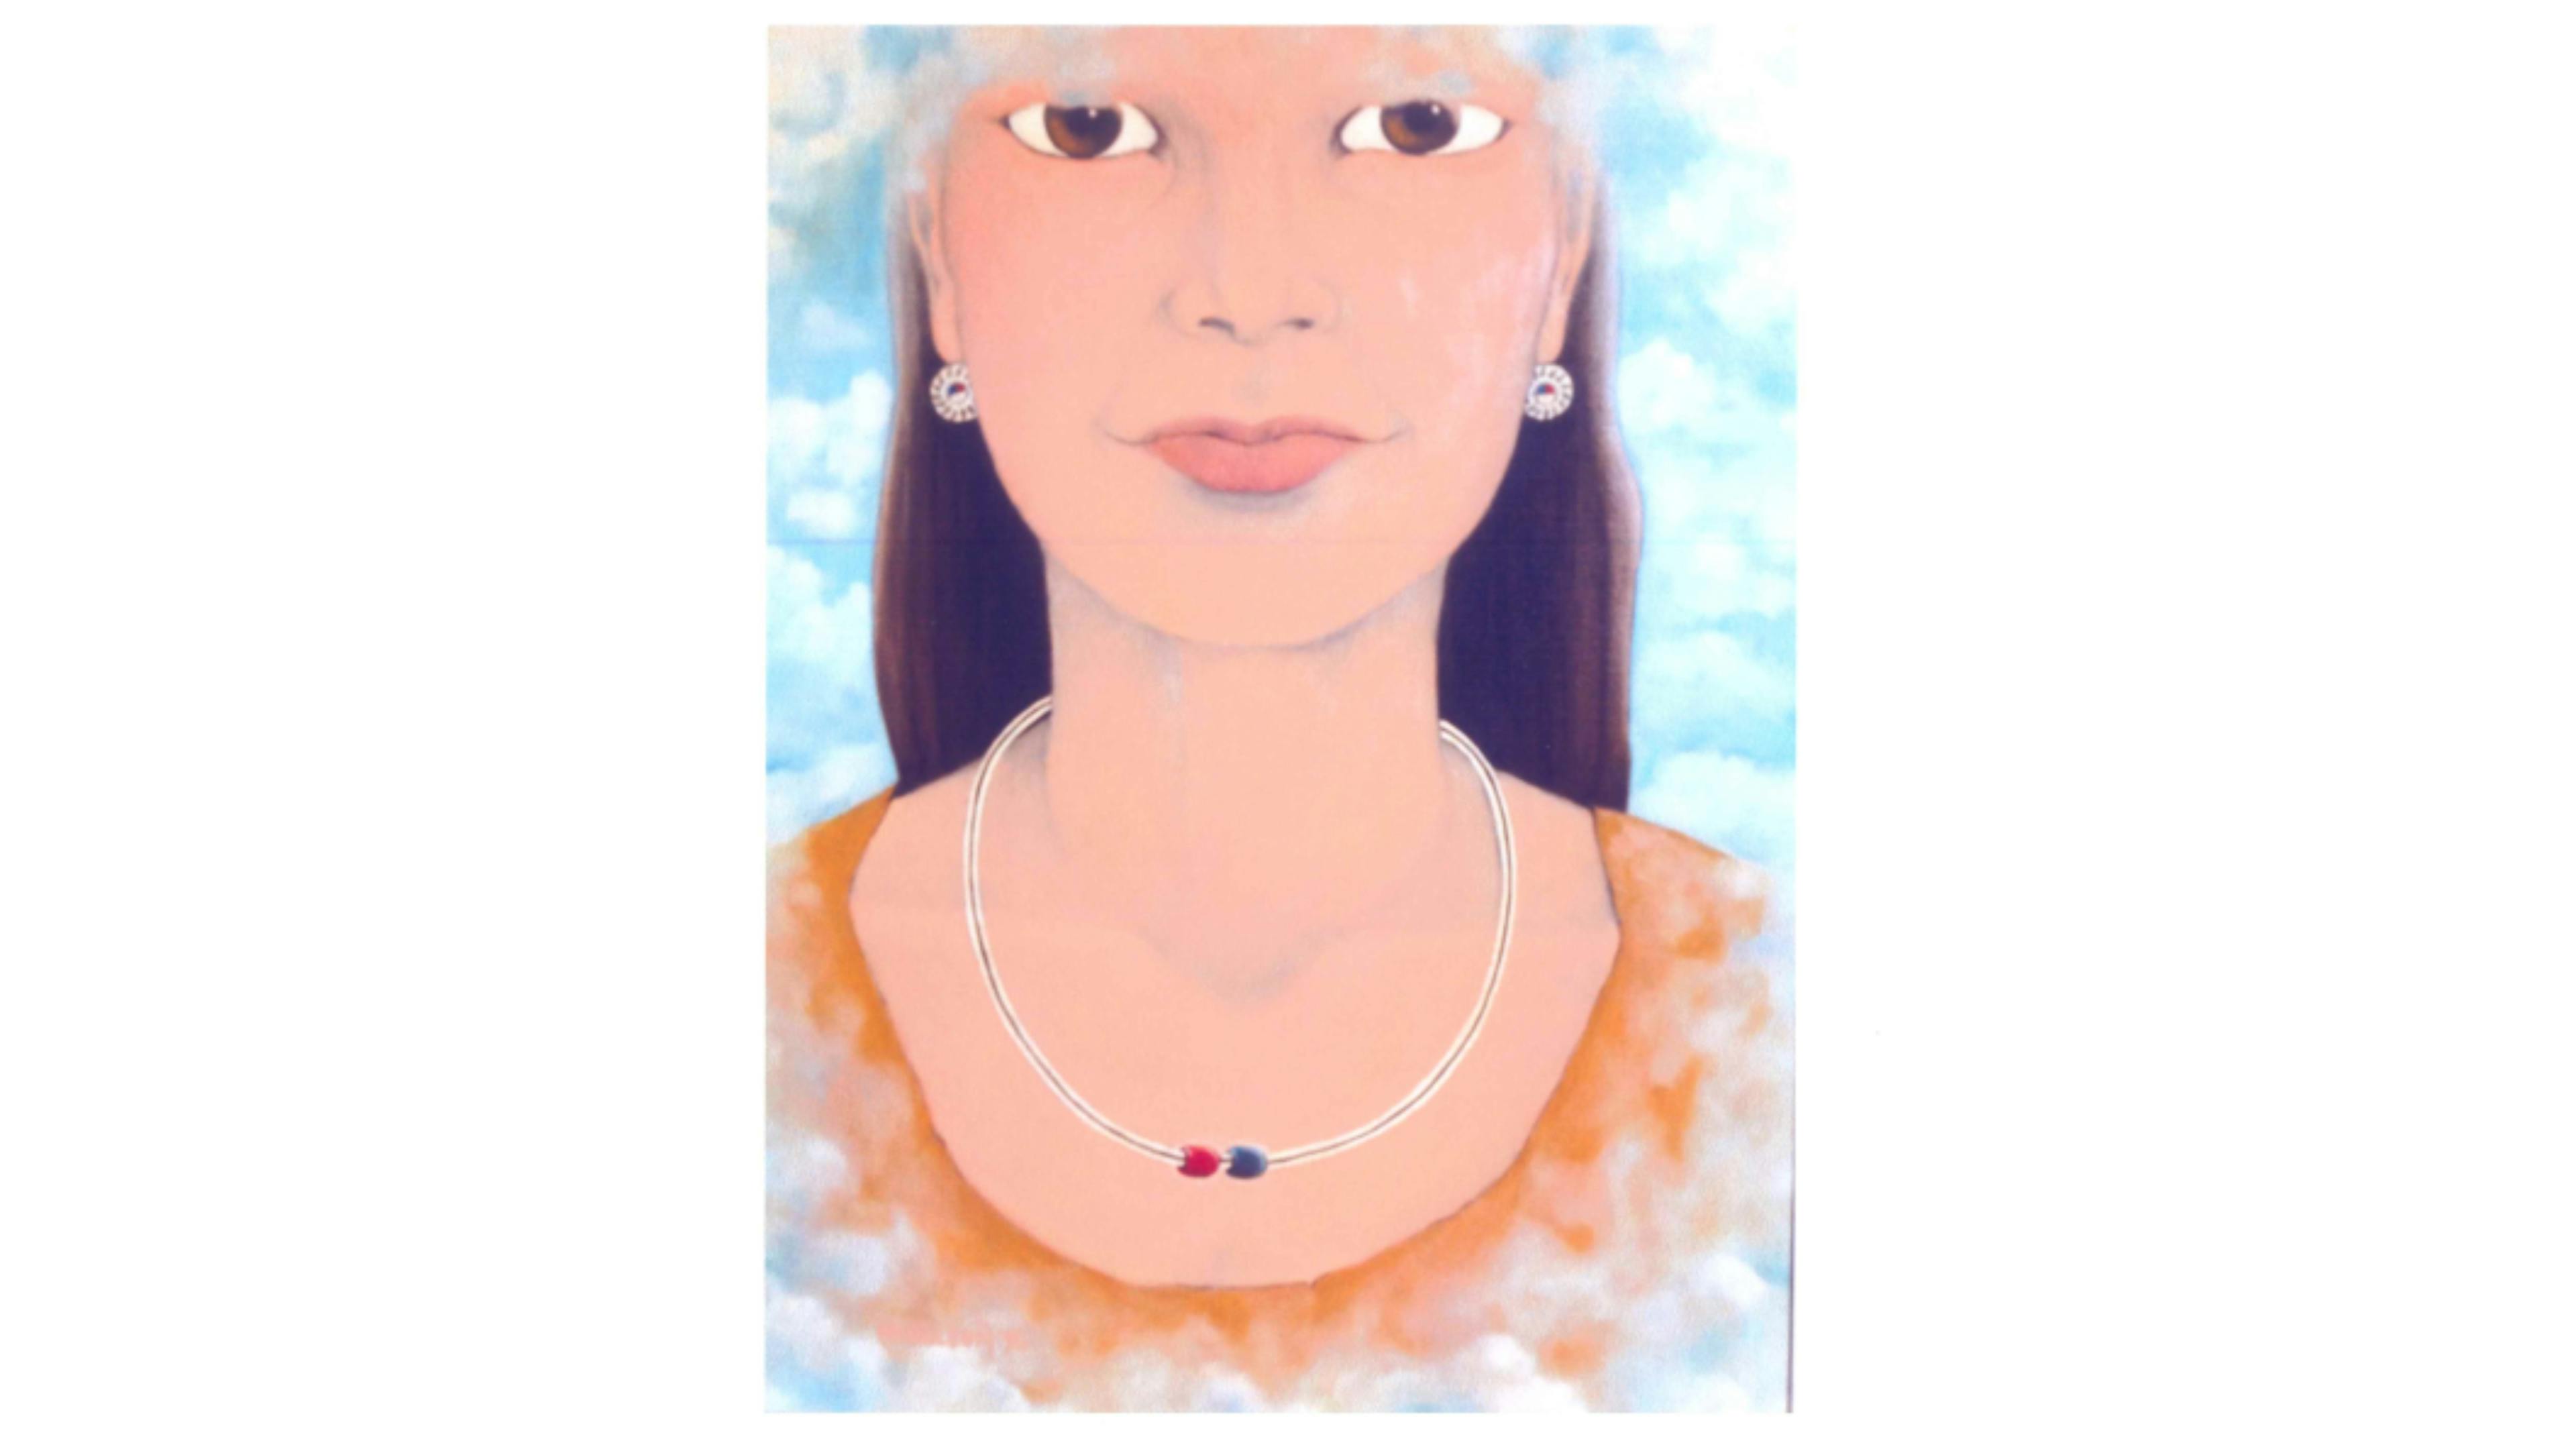 Portrait of a brown haired woman with brown eyes, zuni sun earrings and a necklace with one red bead and one blue bead in front of a blue sky background. 